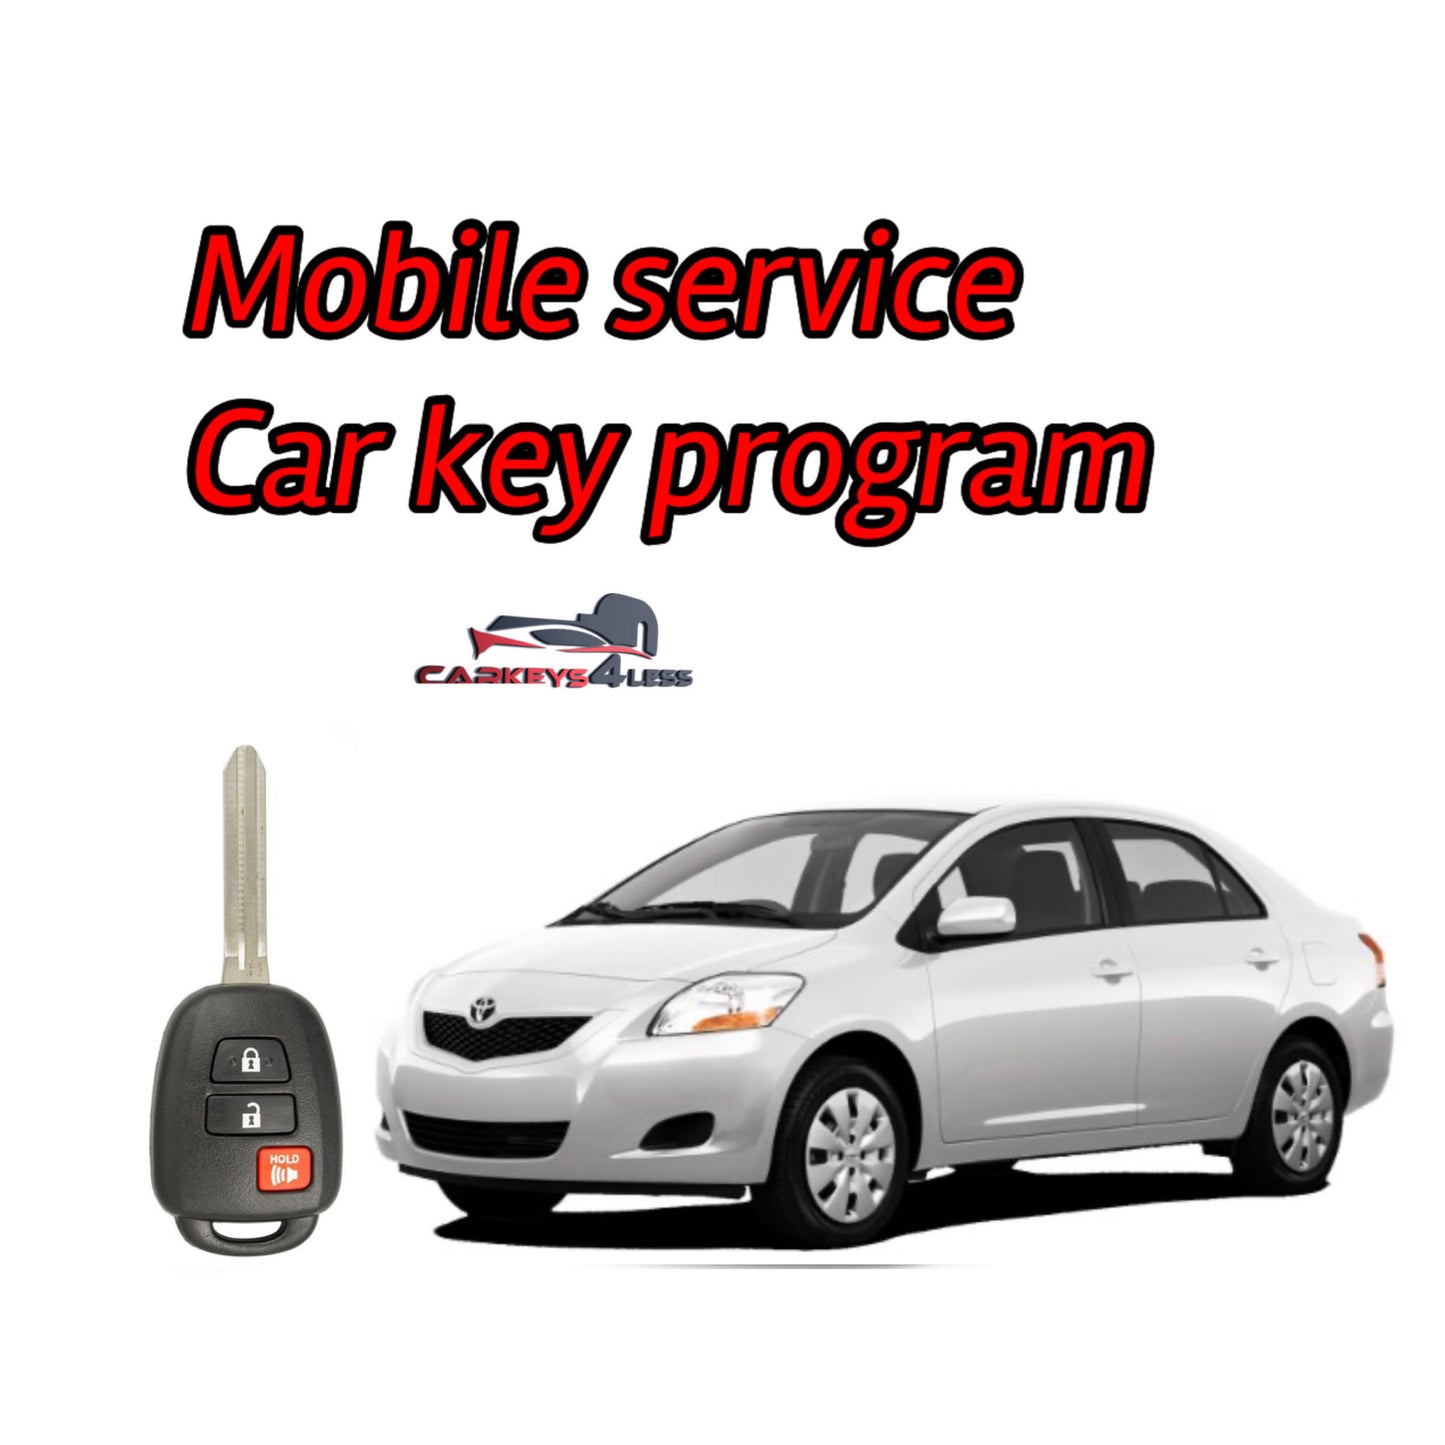 Mobile service for an aftermarket Toyota car key replacement